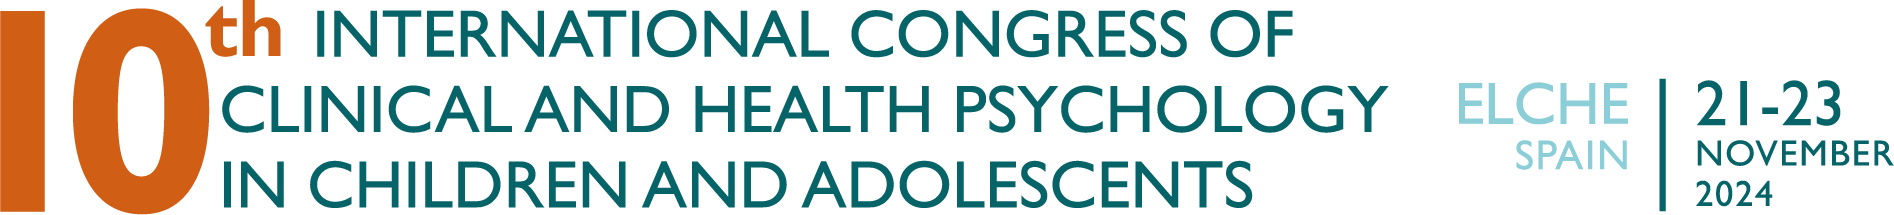 10th International Congress of Clinical and Health Psychology in Children and Adolescents